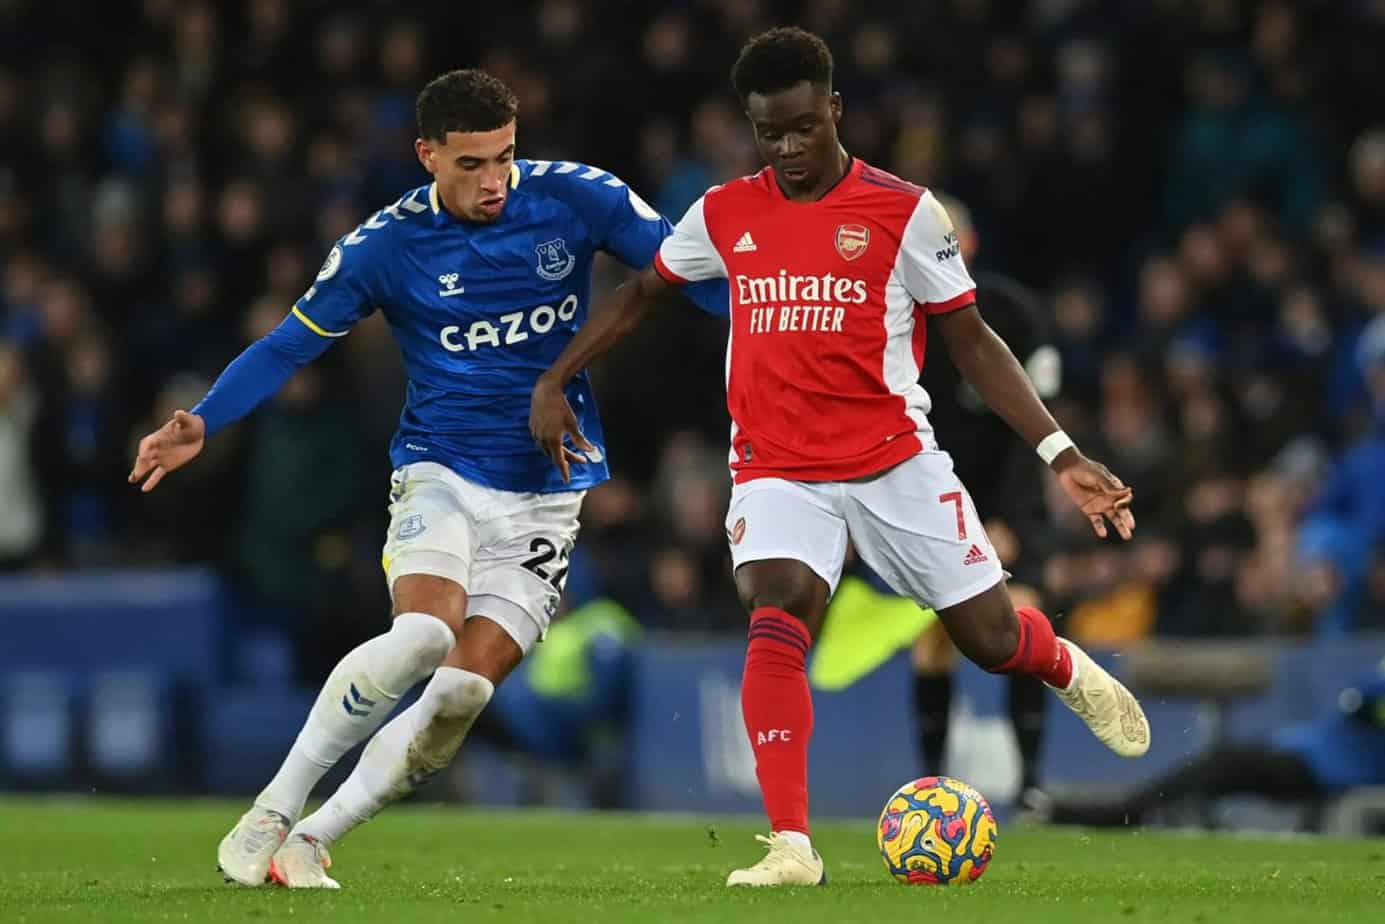 Arsenal vs. Everton Betting Odds and Prediction